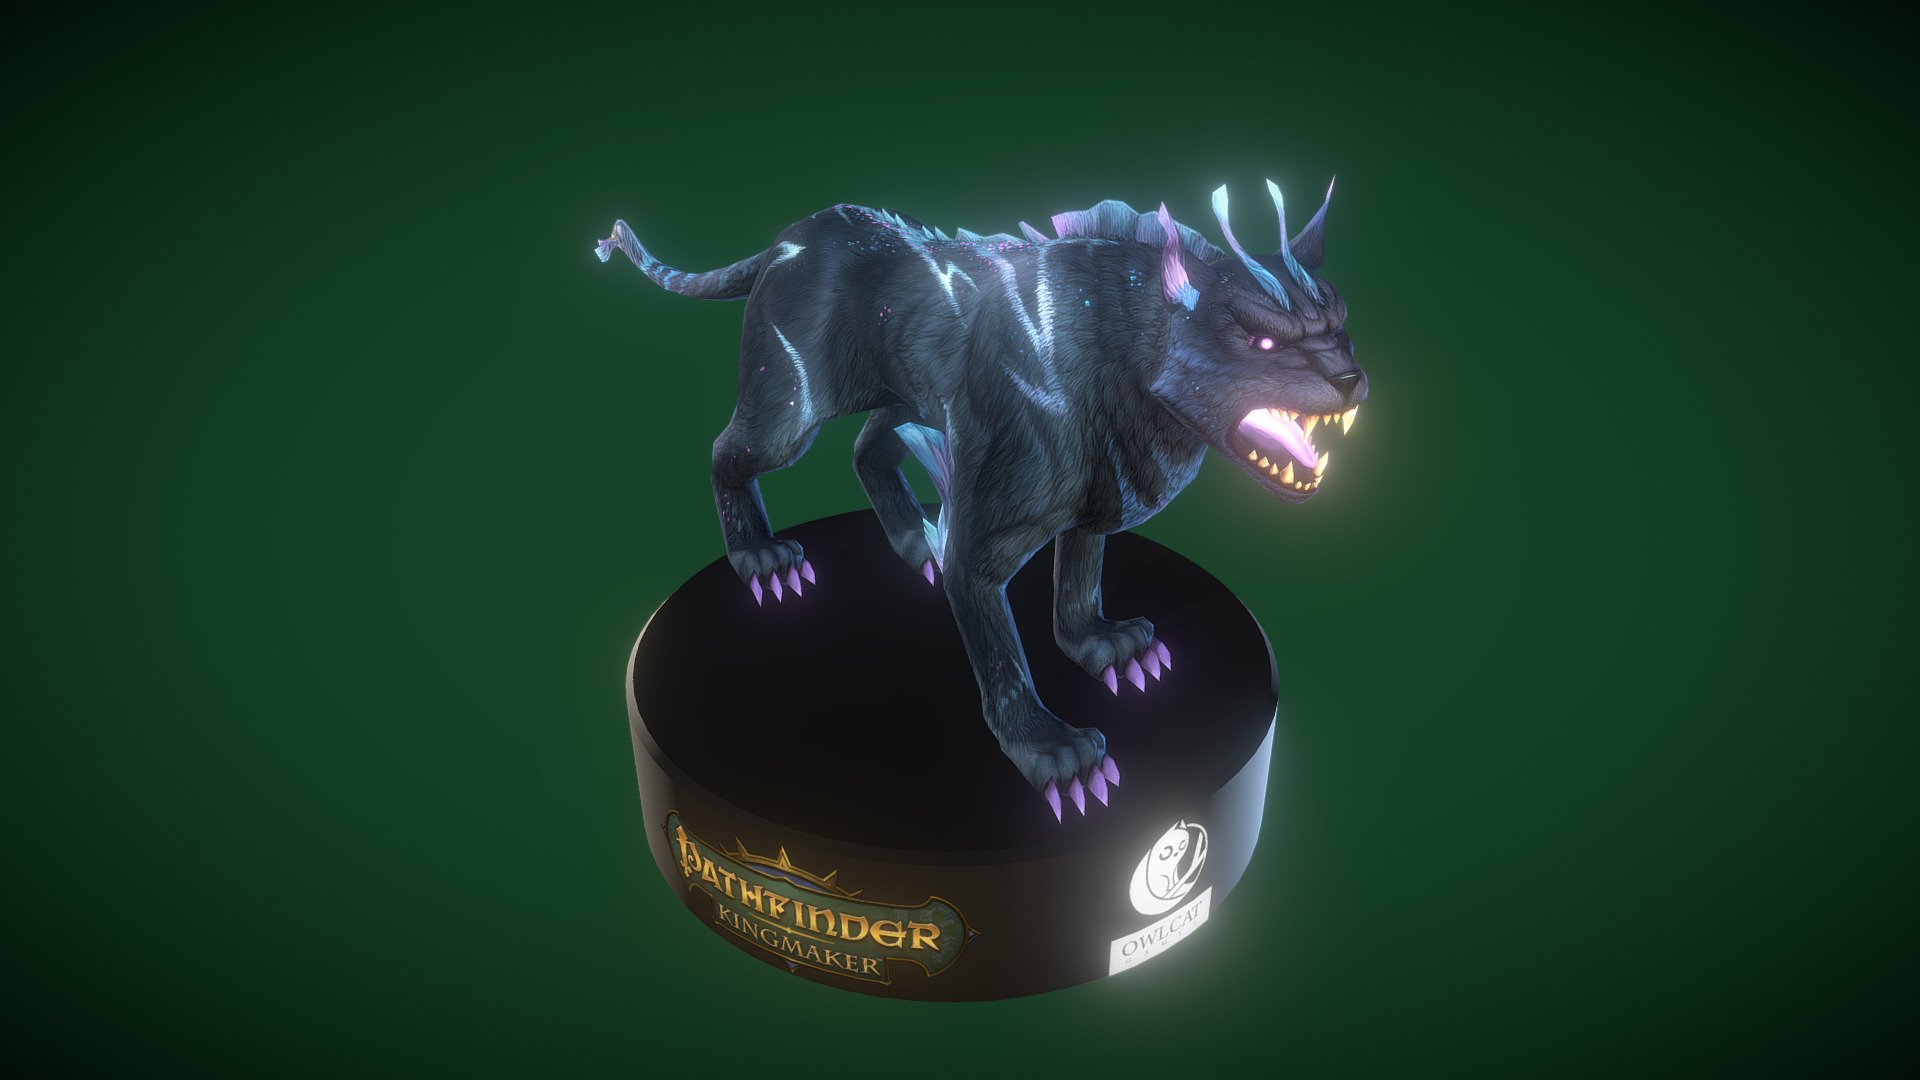 Monster for the game.  Hand paint texture

3480 polygons. 1024x1024 texture

PATHFINDER: KINGMAKER CRPG © 2018 Owlcat Games, My.com. Developed in association and used under license of Paizo Inc 3d model